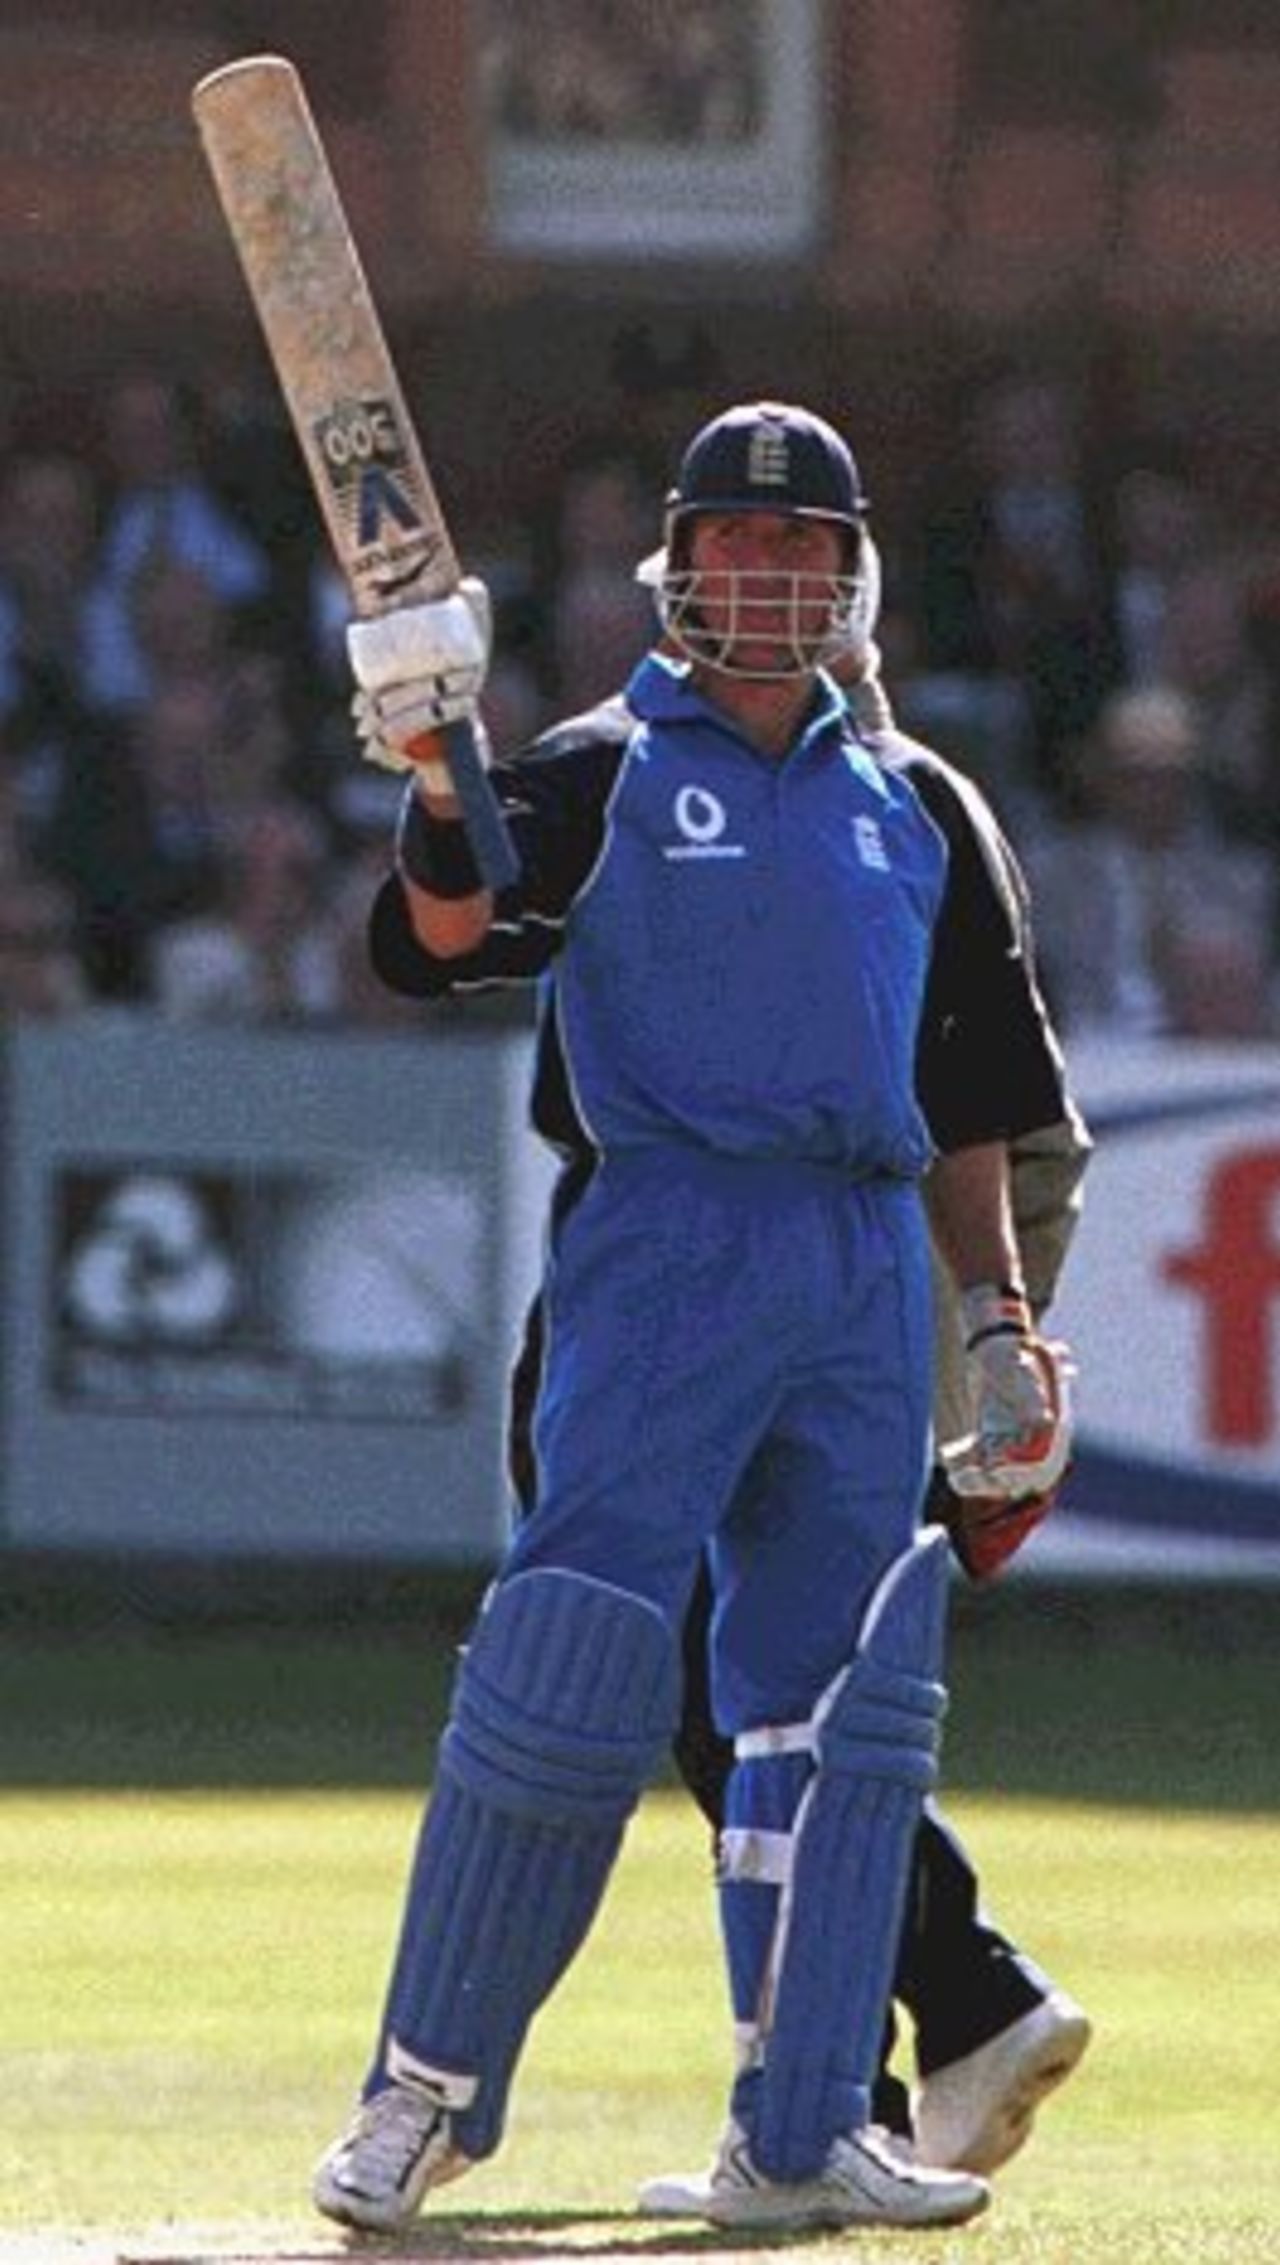 22 Jul 2000: Alec Stewart of England acknowledge the crowd as he reached his Fifty during the match between England and Zimbabwe in the Final of the NatWest Triangular series at Lord's, London.